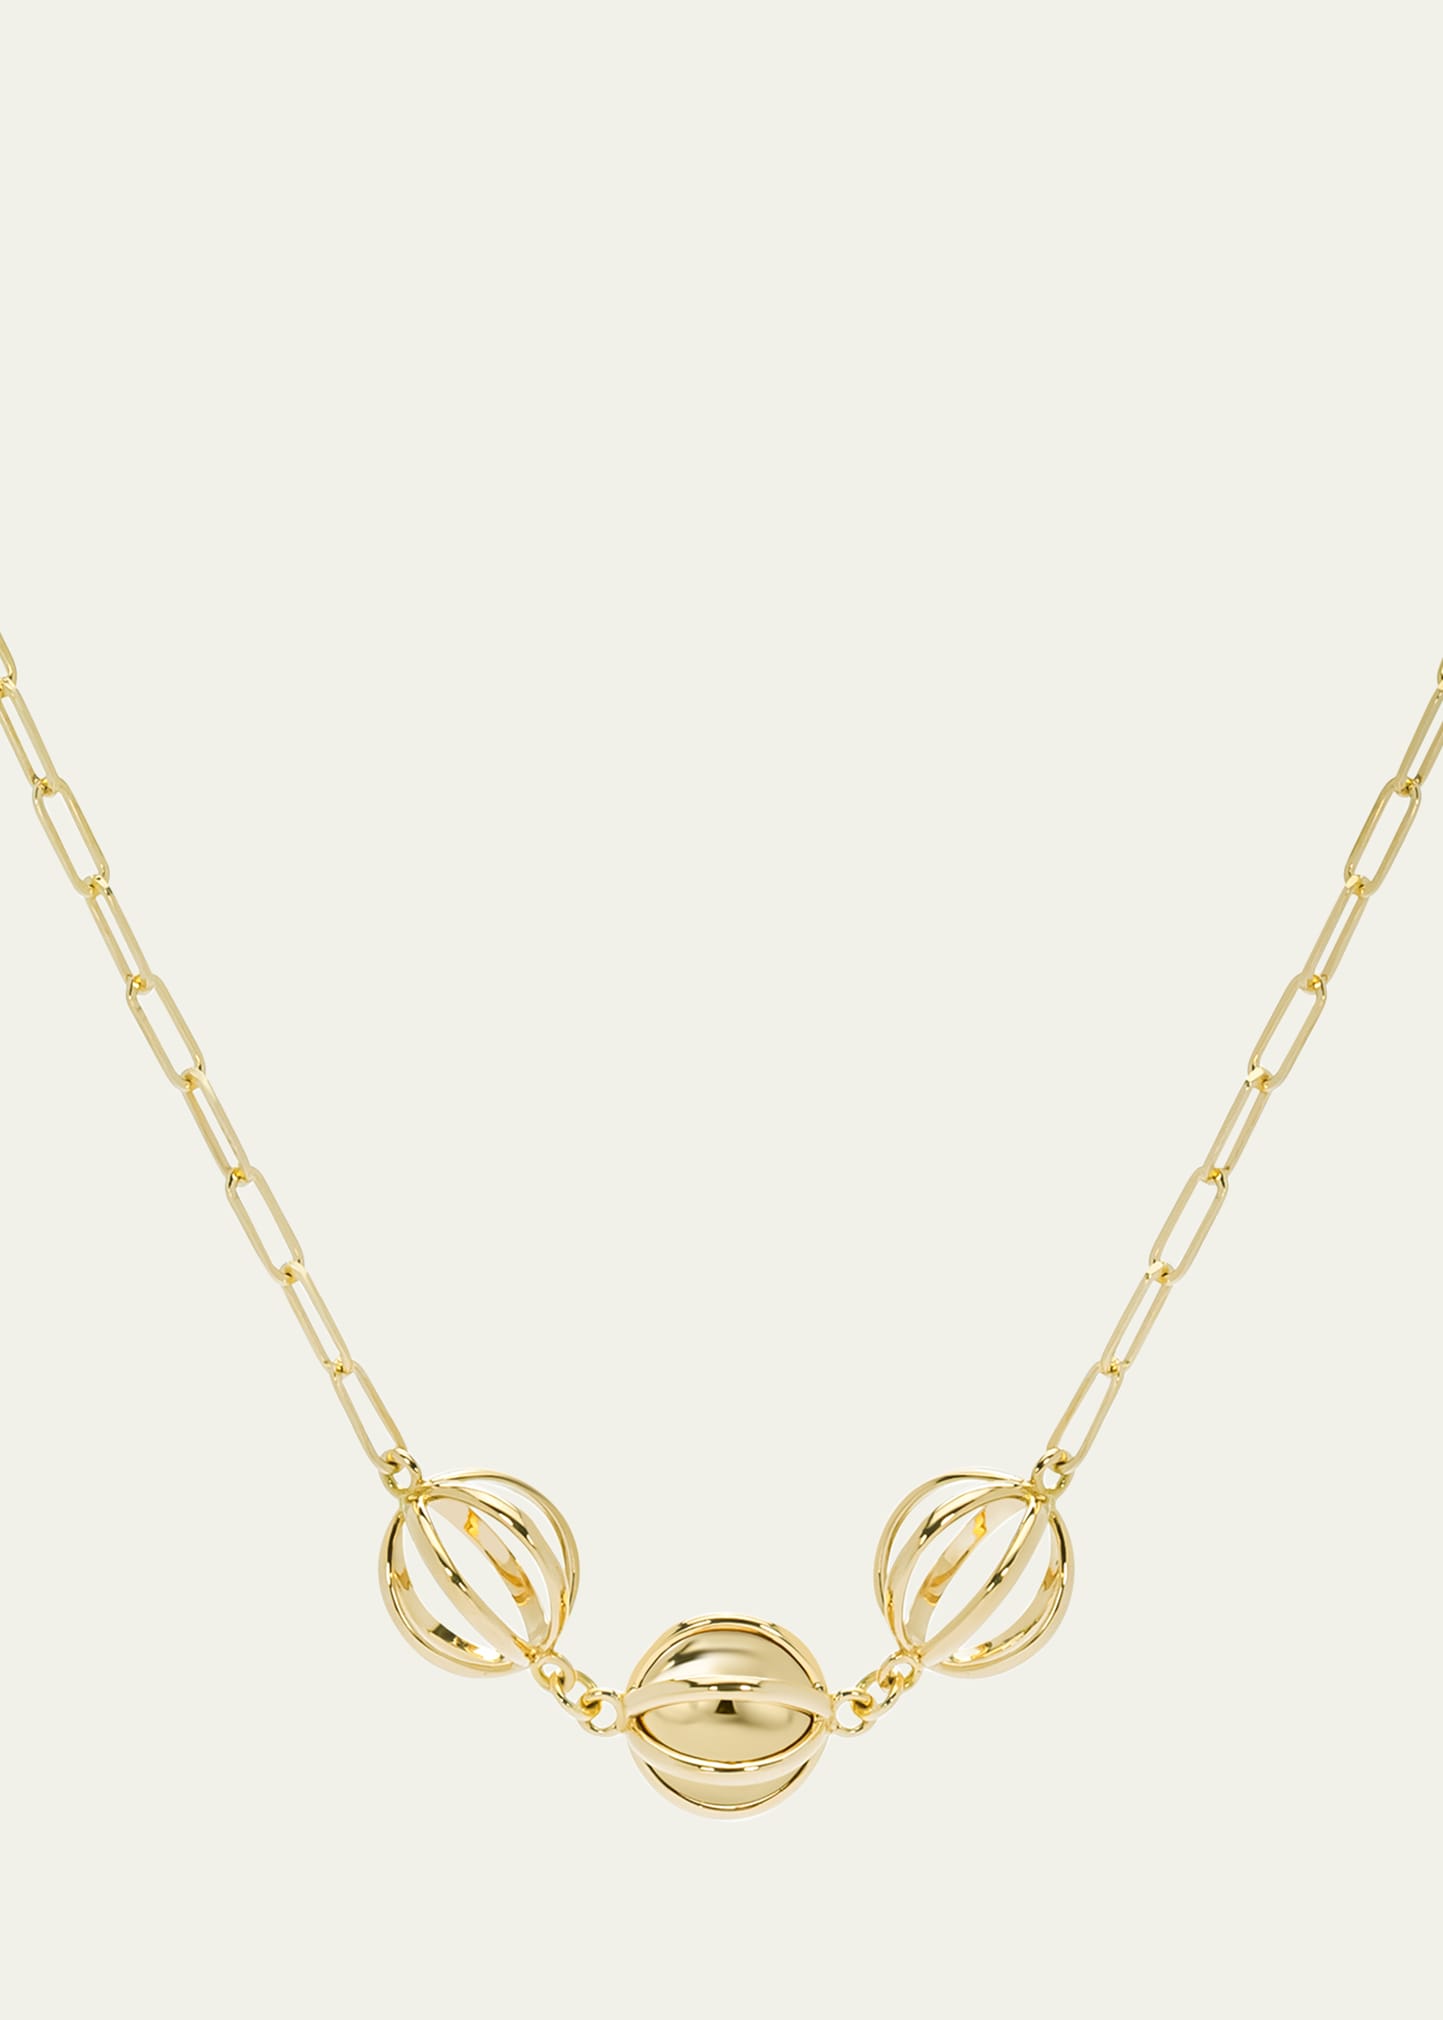 L. Klein Prisma 18k Yellow Gold Paperclip Chain Necklace